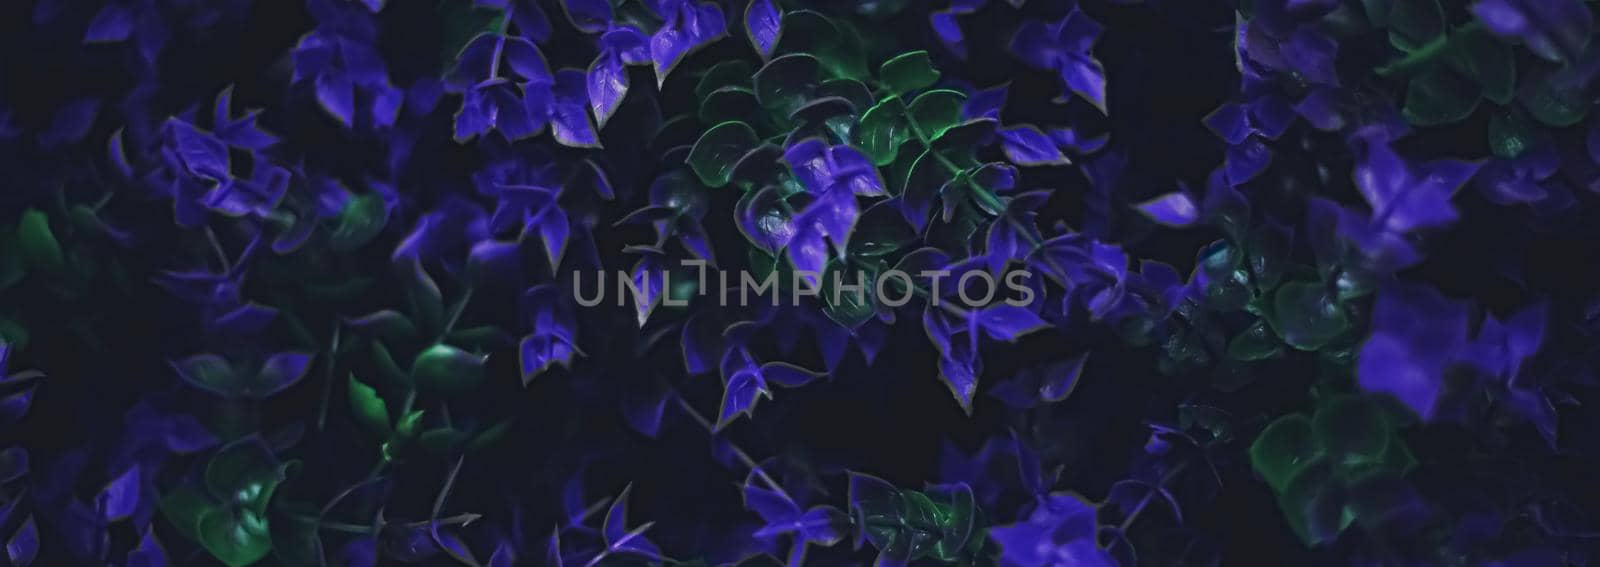 Exotic purple flowers and leaves at night as nature background closeup